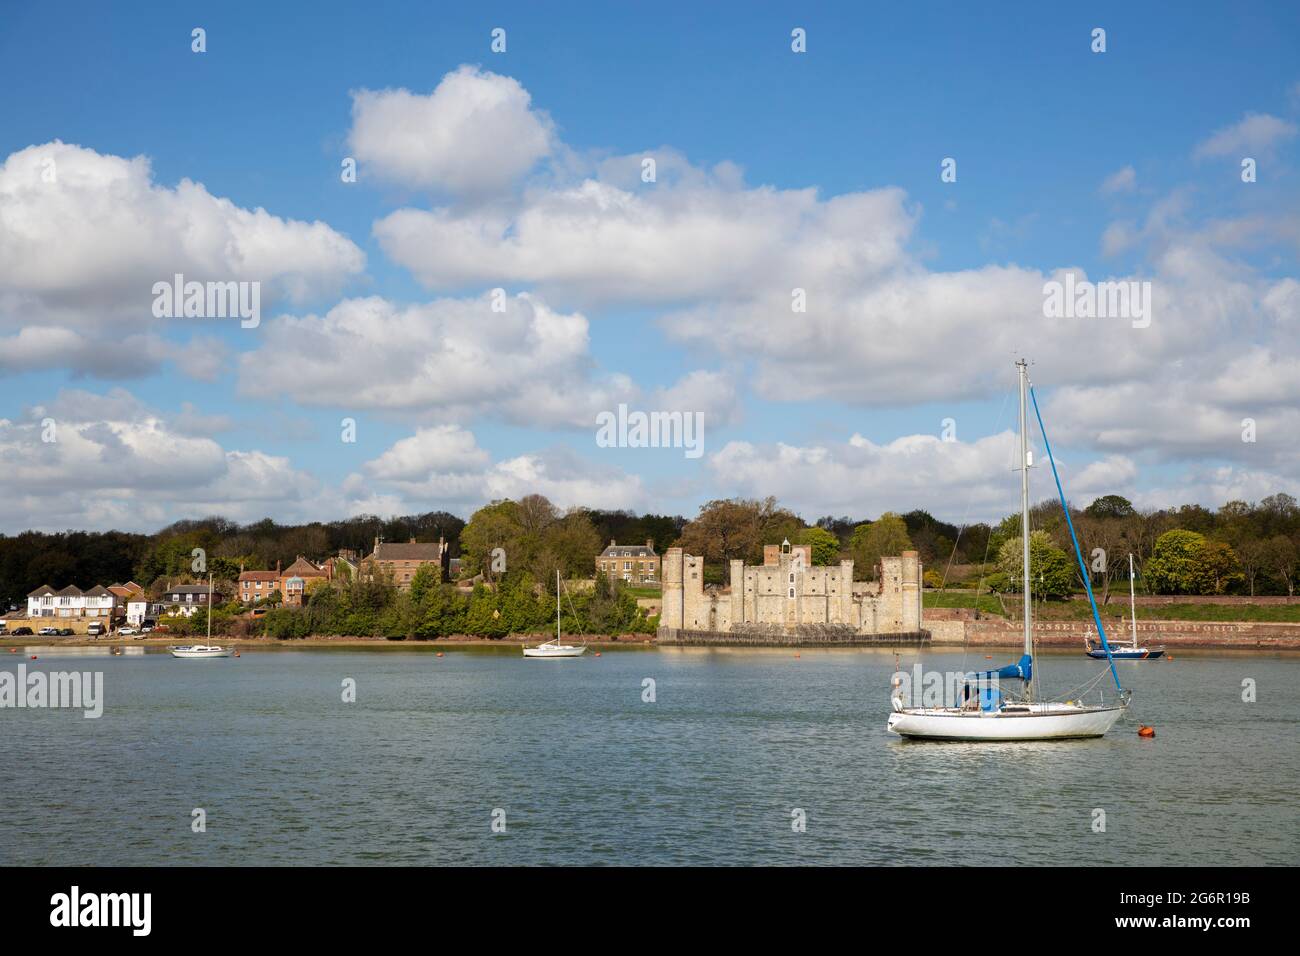 Upnor Castle and Upnor village on the west bank of the River Medway, Upnor, near Chatham, Kent, England, United Kingdom, Europe Stock Photo